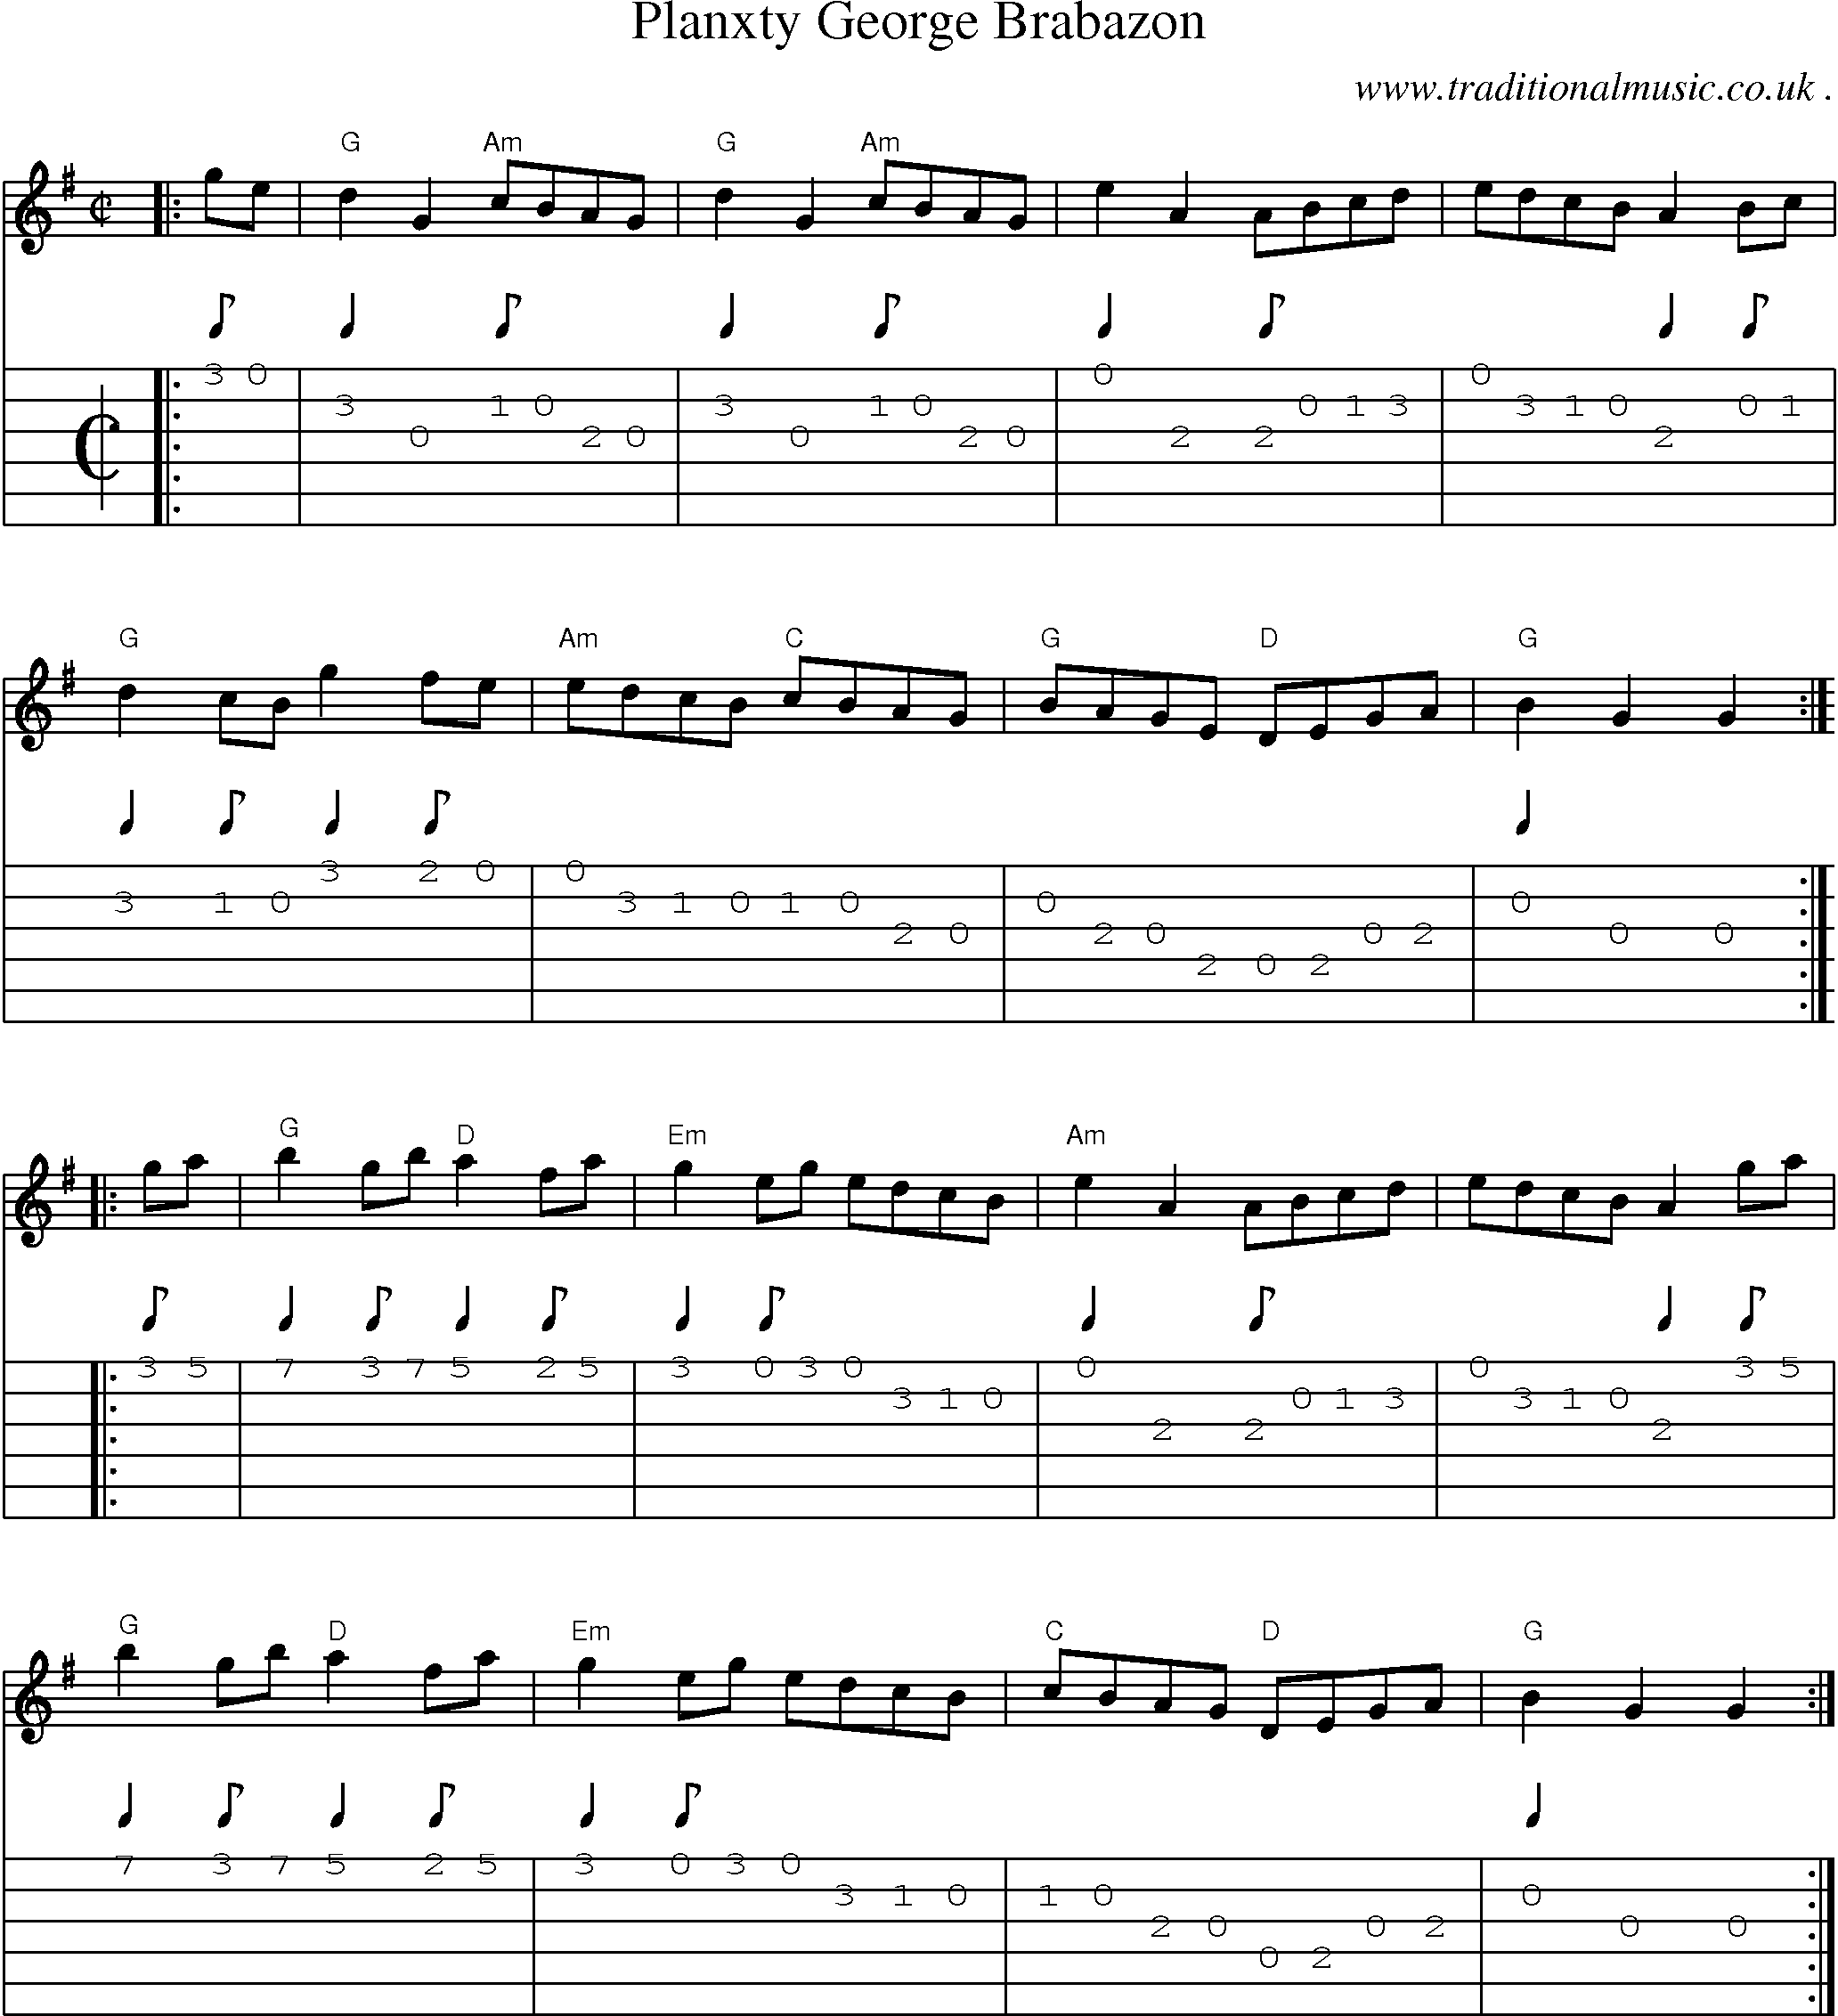 Sheet-music  score, Chords and Guitar Tabs for Planxty George Brabazon